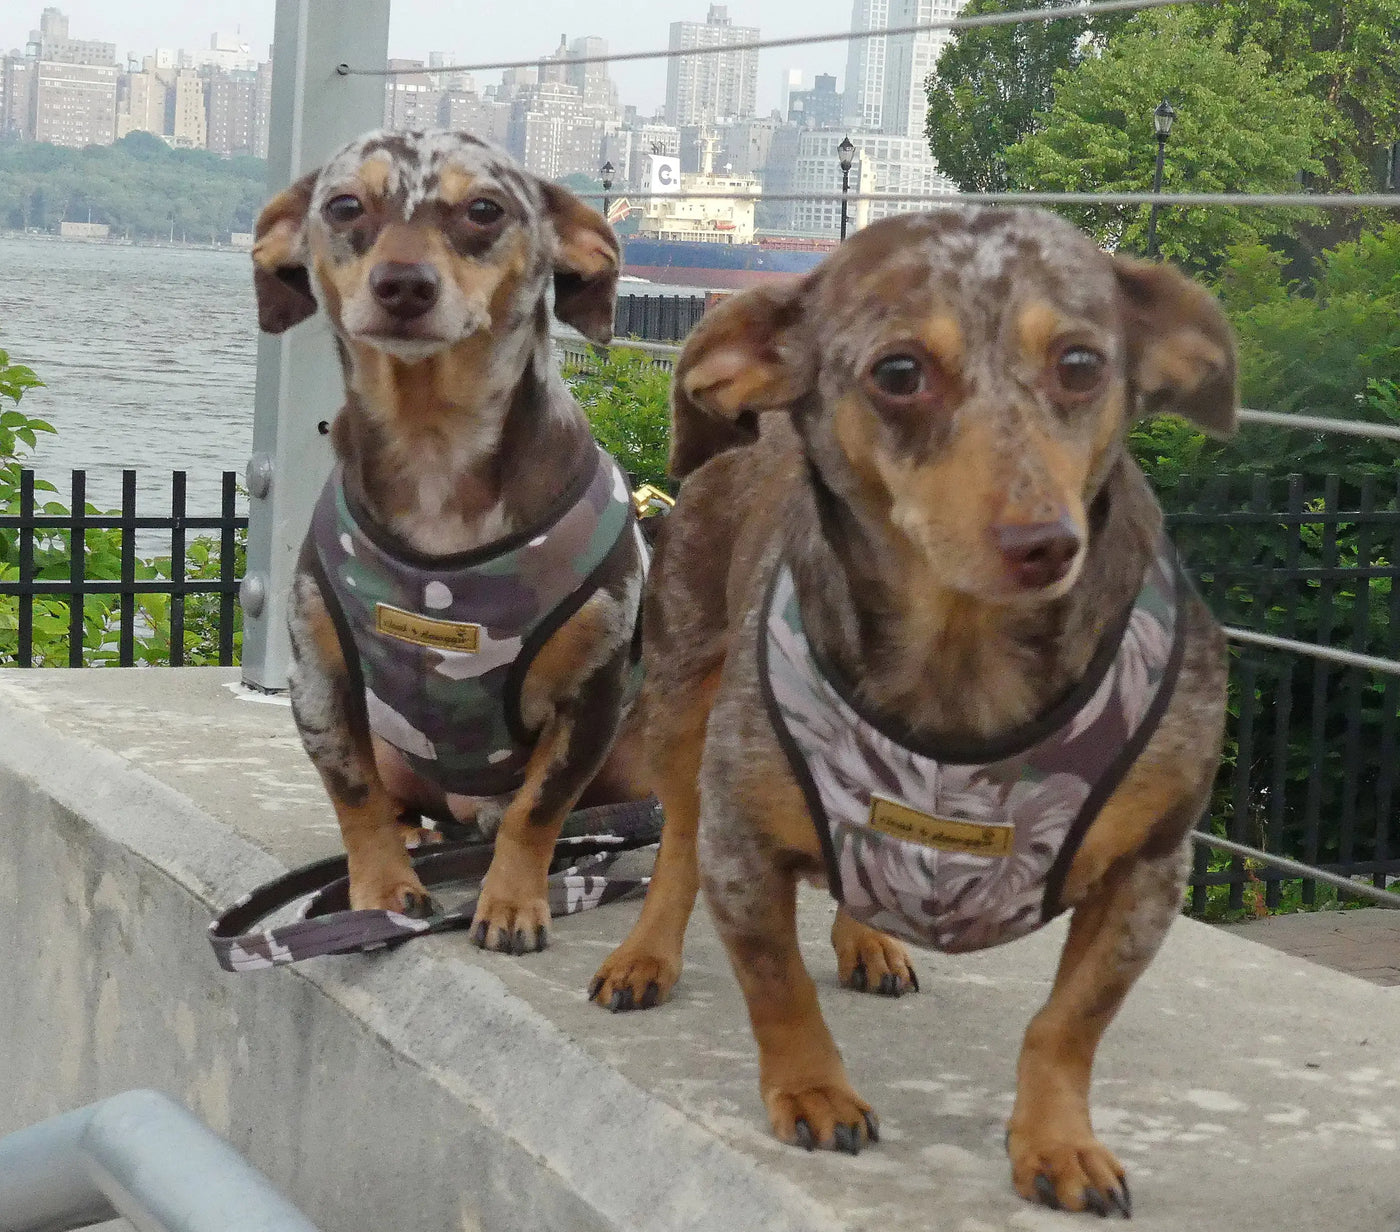 Precision Fit Camo Harnesses on dachshund dogs